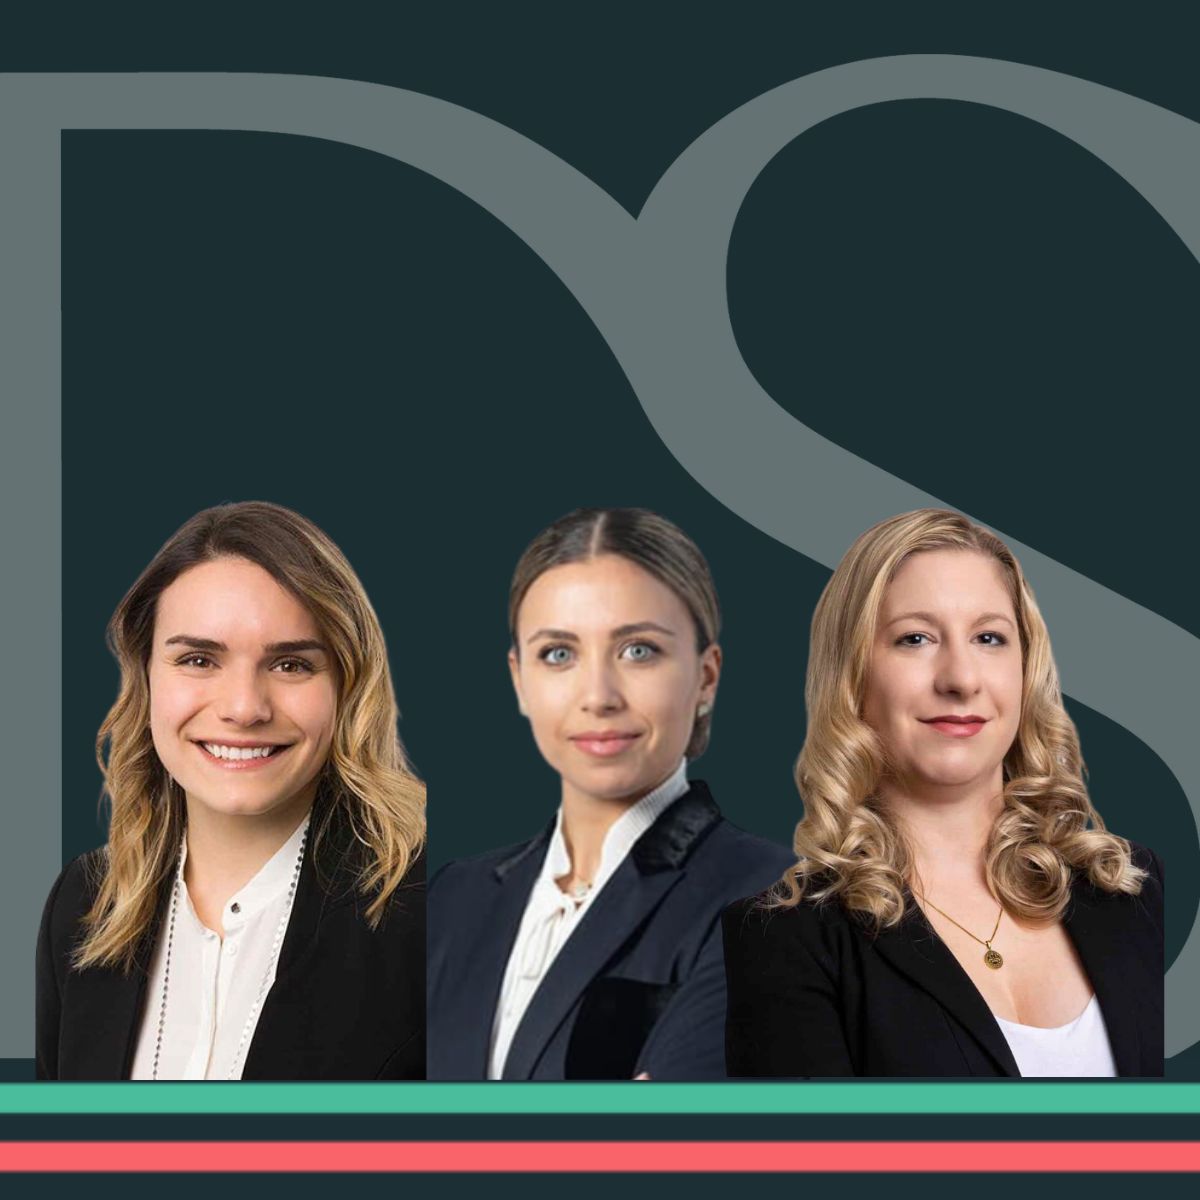 Angèle di Giovanni, Lindsay Amantea, and Andrée-Anne Auclair share their perspectives on working at DS Lawyers